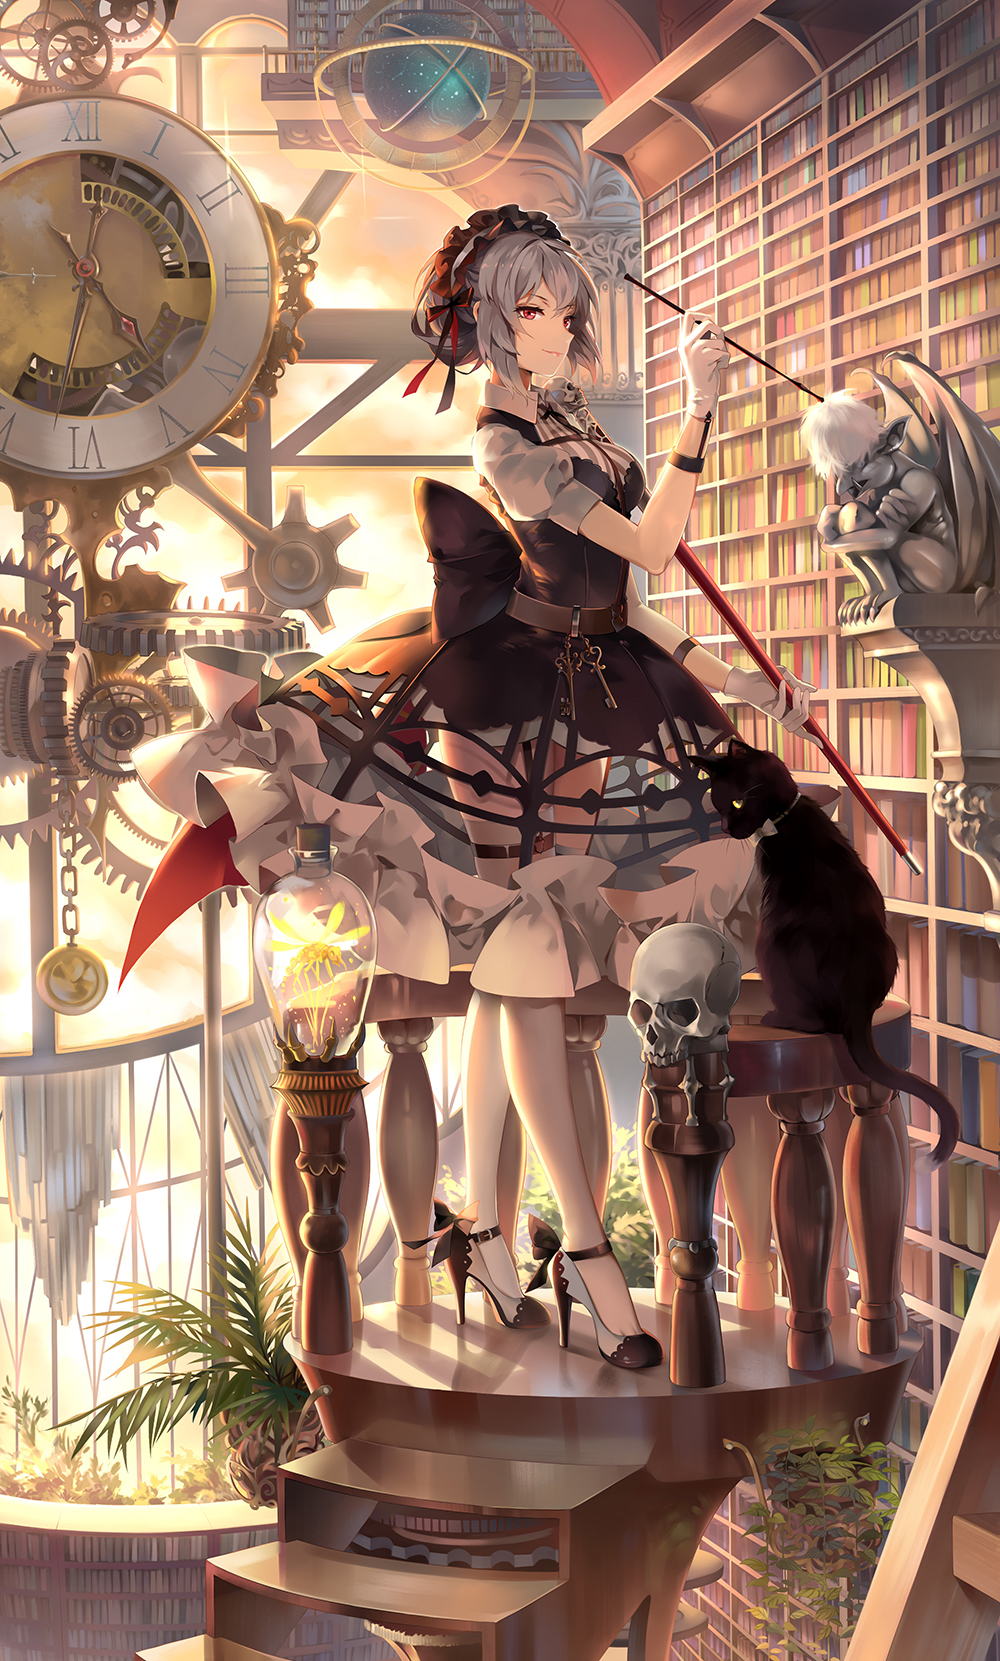 1girl baluster belt black_cat bonnet book bookshelf bow cane cat character_request clock clockwork gears globe gloves handrail high_heels highres insect jar jidong_zhandui key library neko_(yanshoujie) plant potted_plant puffy_short_sleeves puffy_sleeves red_eyes short_sleeves silver_hair smirk solo stairs statue strappy_heels thigh-highs thigh_strap white_gloves white_legwear